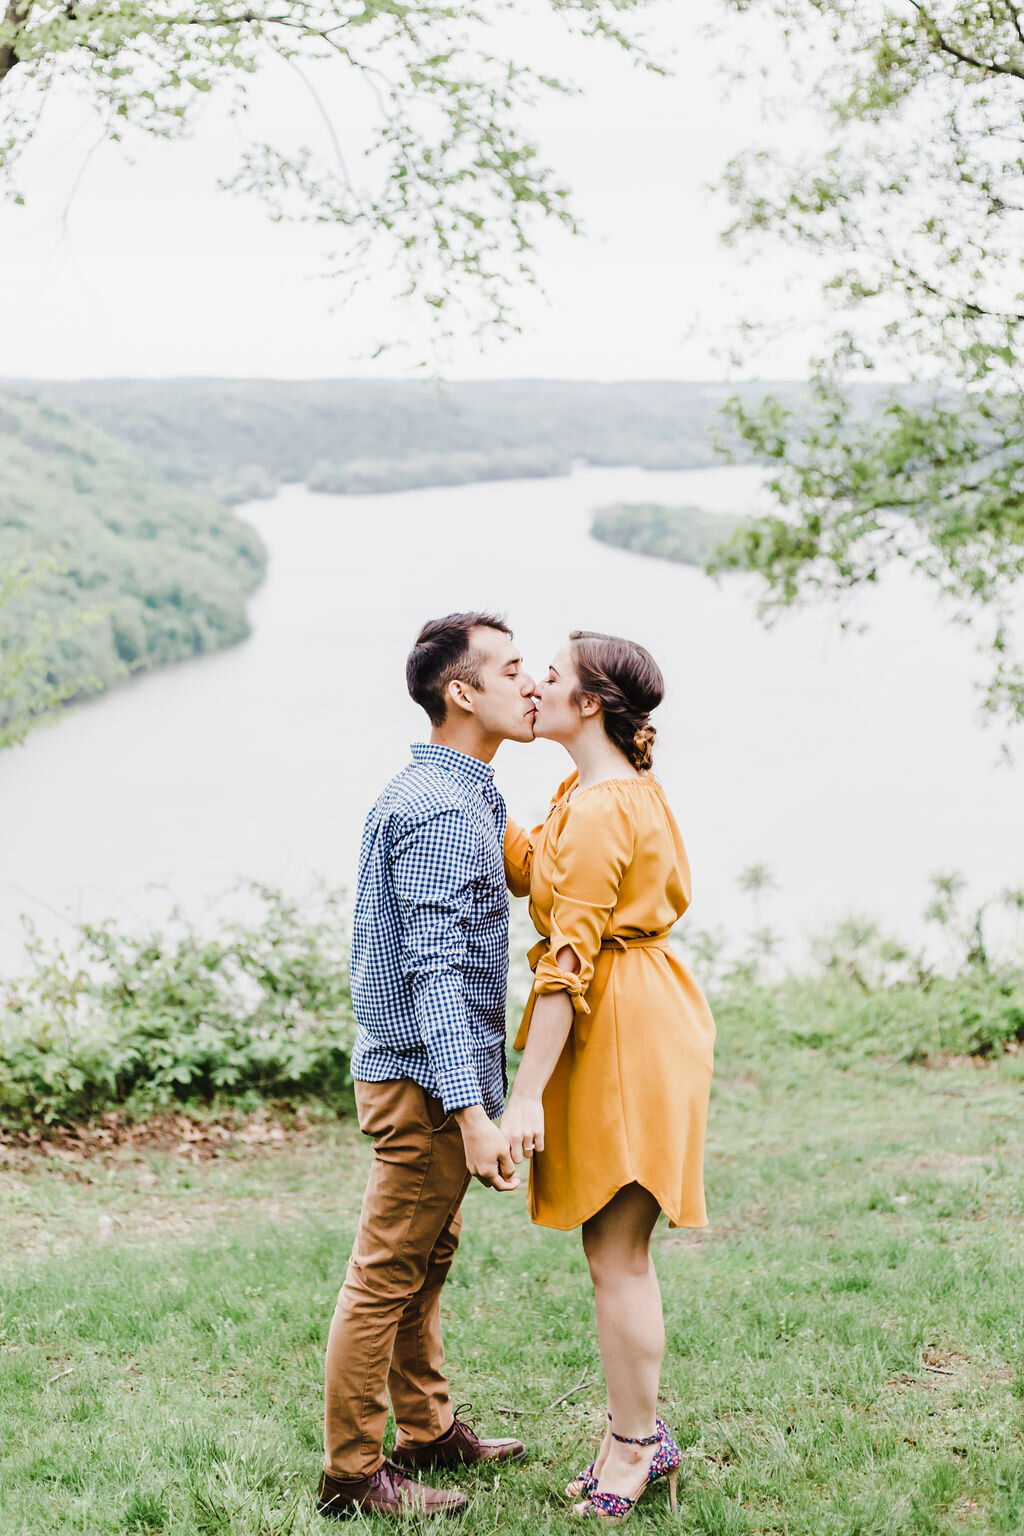 A surprise engagement at Pinnacle Overlook  in Holtwood. overlooking the scenic Susquehanna River. Photographed by Pennsylvania Wedding Photographer Danielle Marie Photography